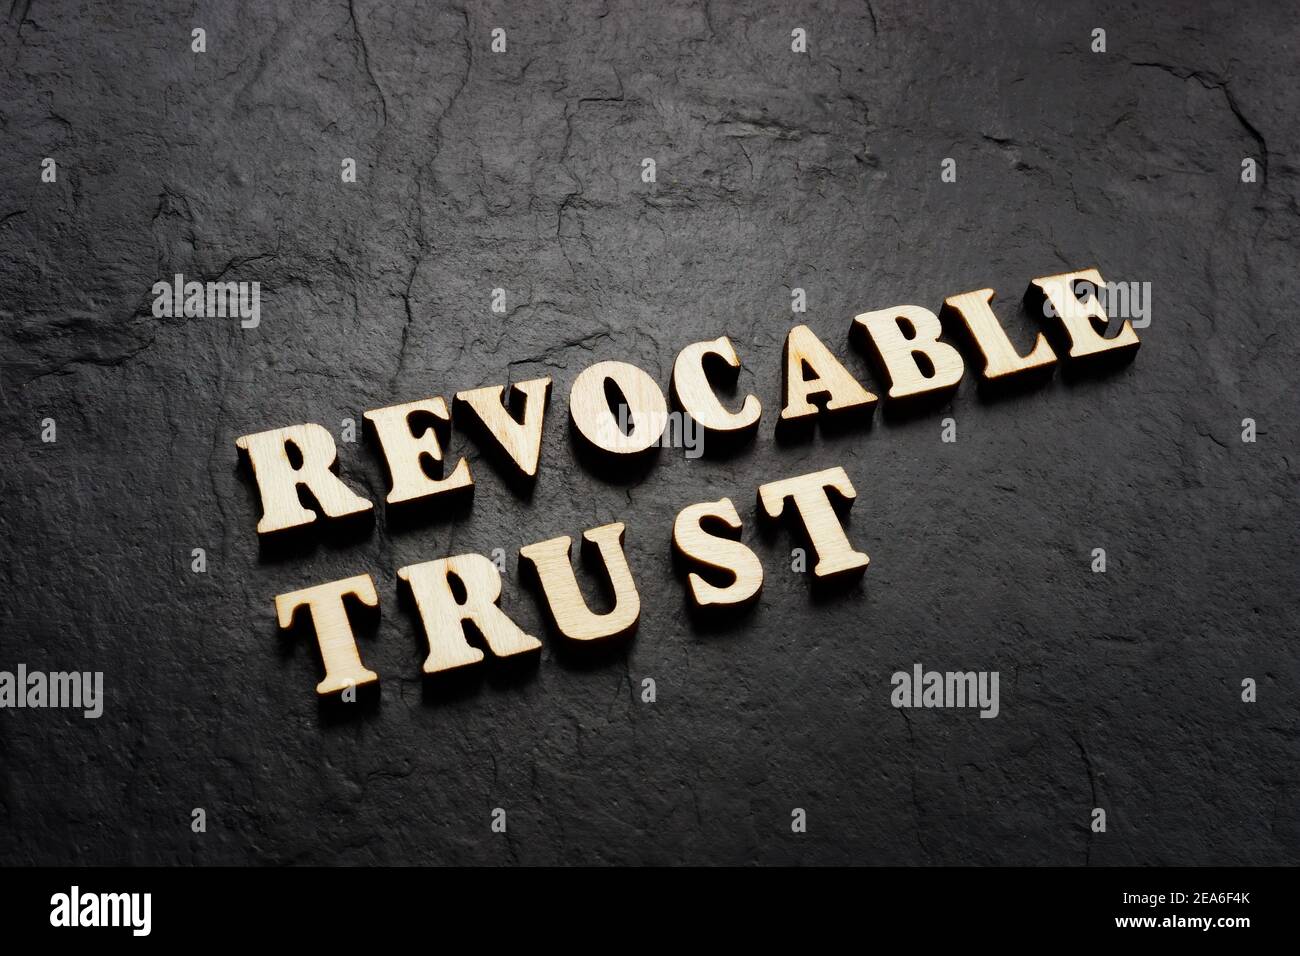 Revocable trust words on the dark background. Stock Photo